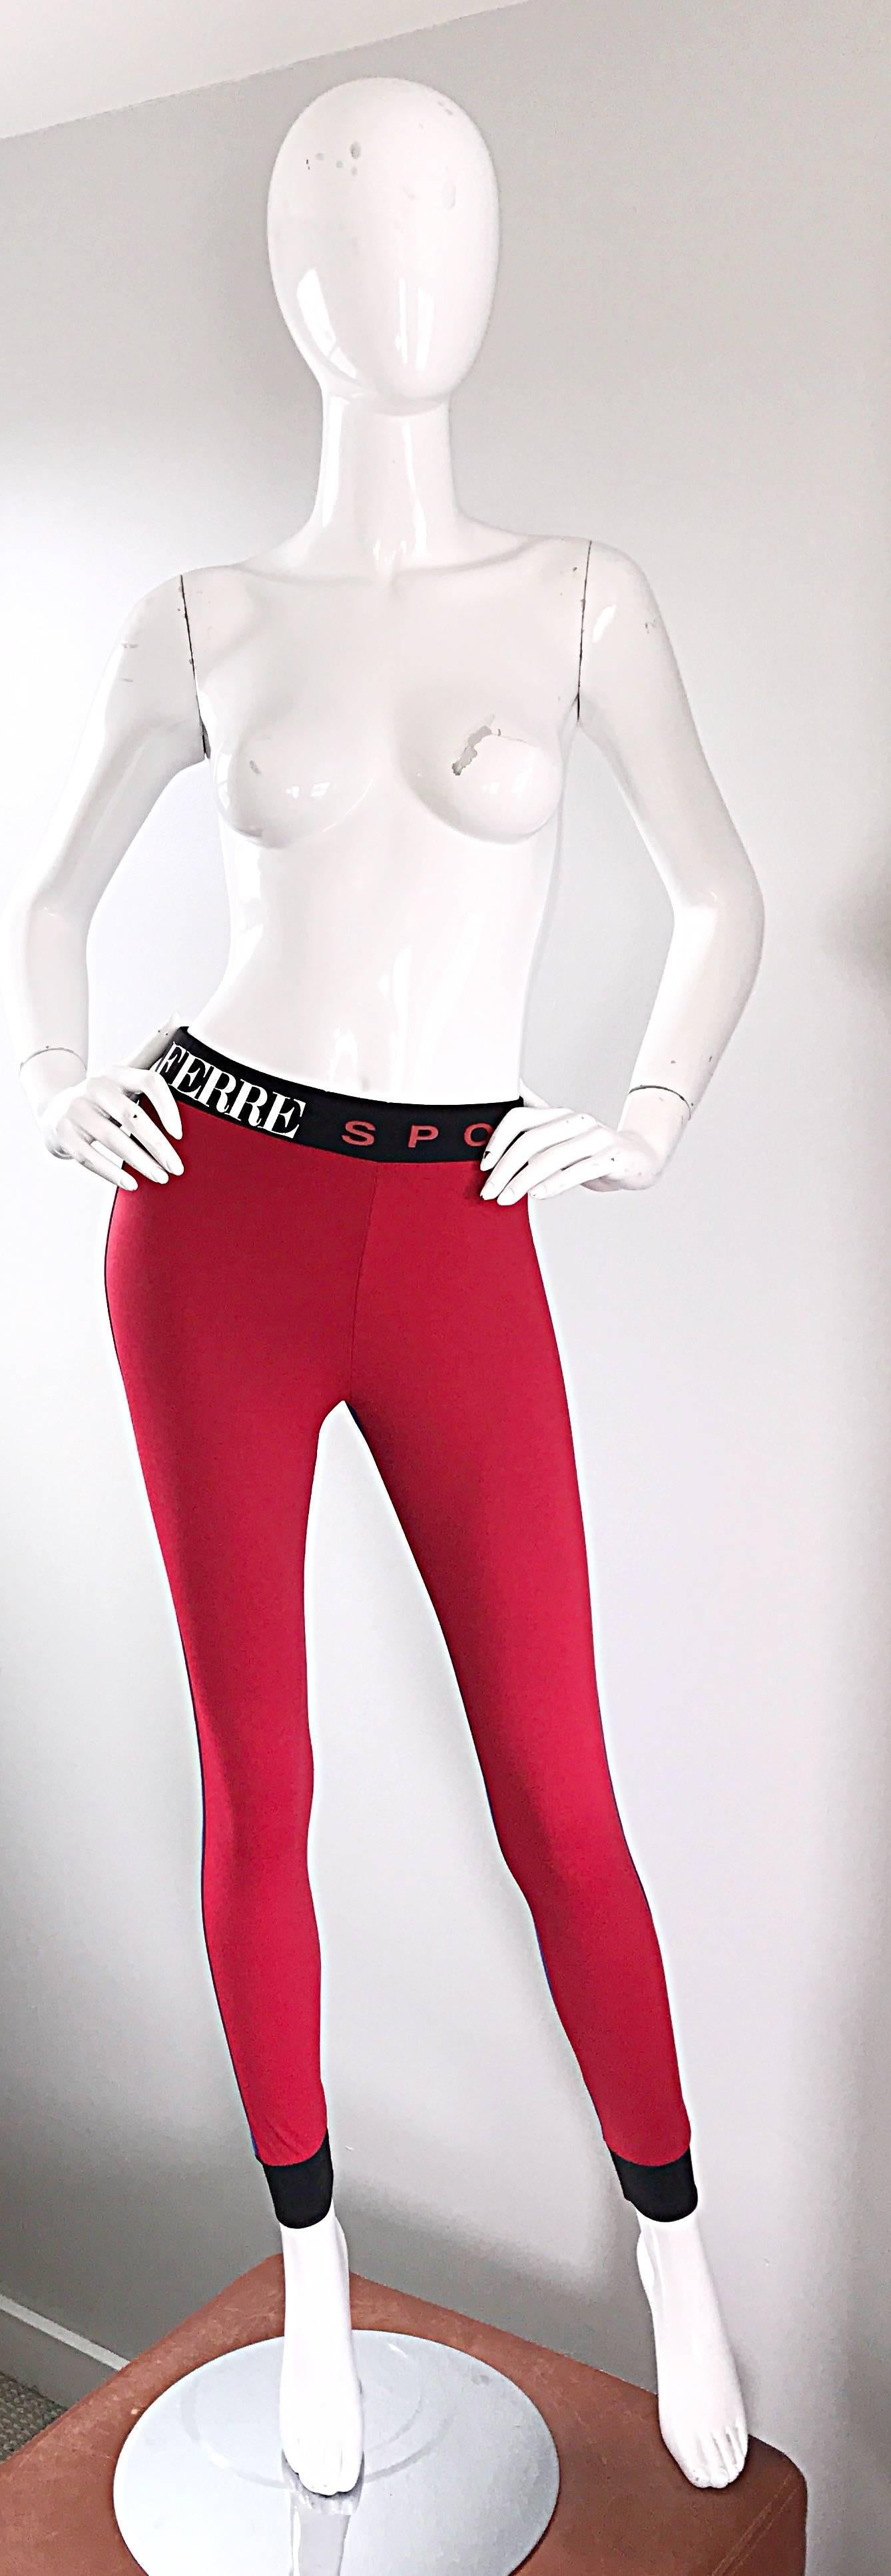 Early 1990s GIANFRANCO FERRE blue and red stretch high waisted color blocked leggings / pants! Features a red front and blue back. Black ribbed cuff at each ankle, and waistband. Soft cotton stretches to fit. In great condition. Made in Italy.